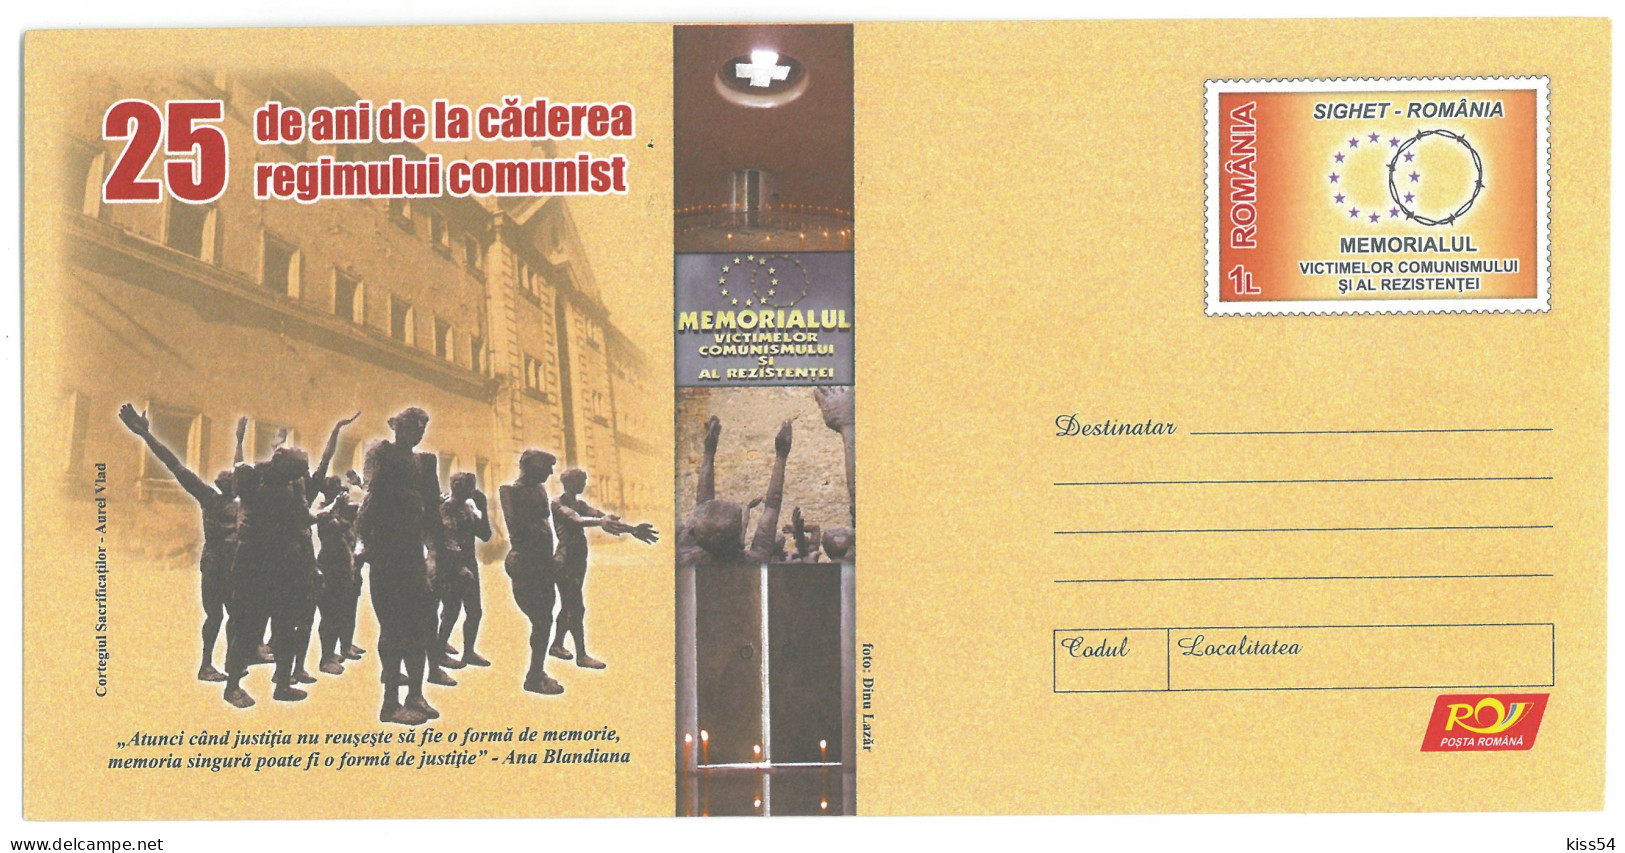 IP 2014 - 13 SIGHET Prison, 25 Years Since The Fall Of Communism, Romania - Stationery - Unused - 2014 - Ganzsachen